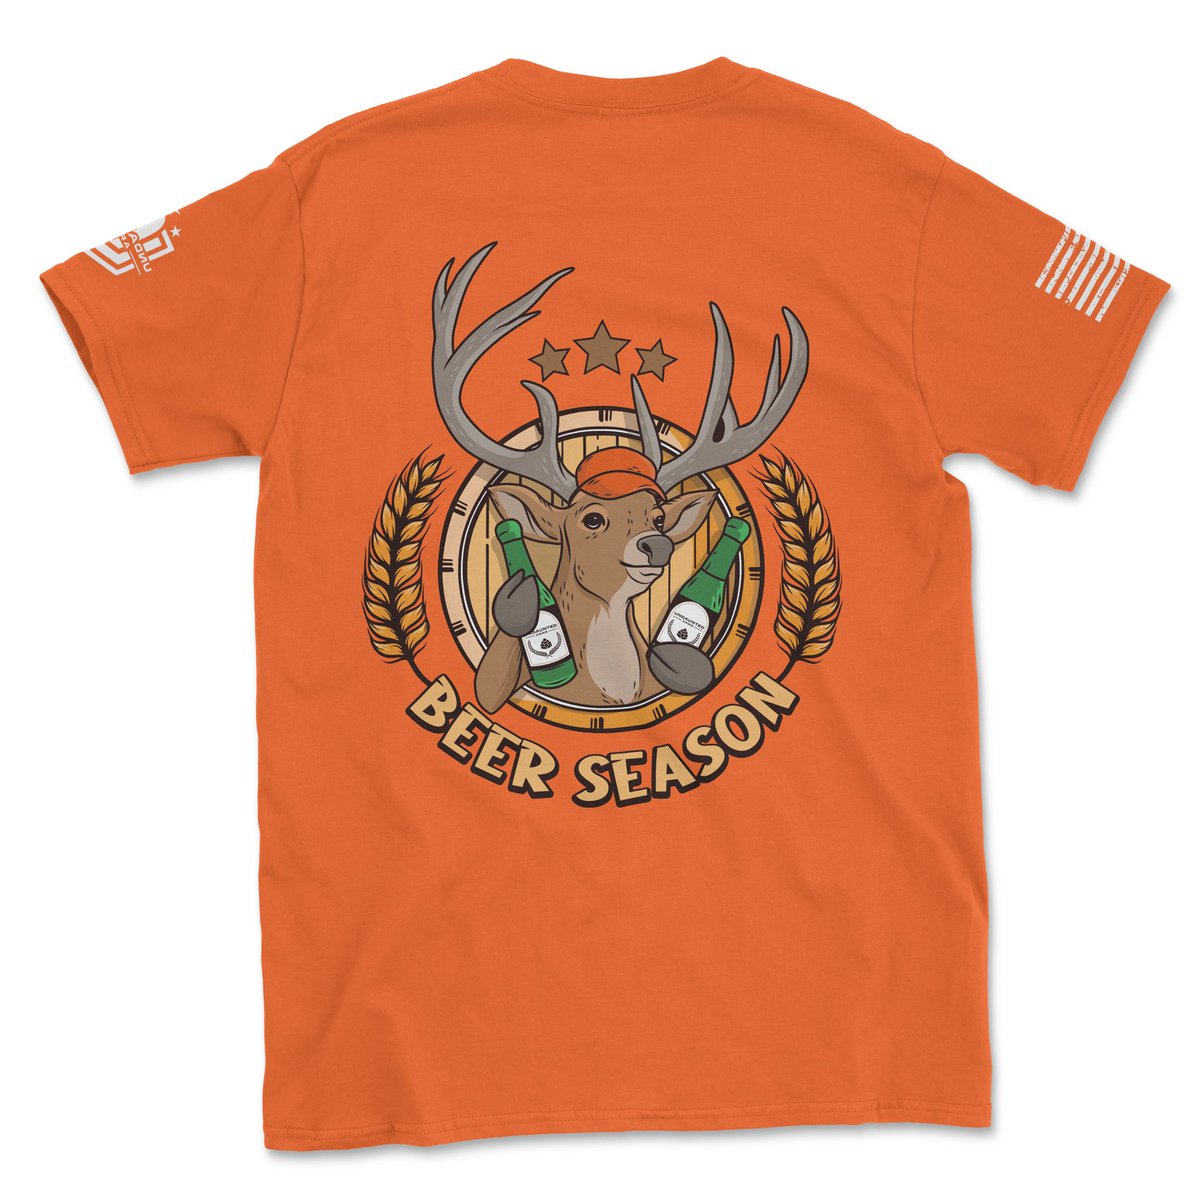 Where are all the #deerhunting people at? #hunting #whitetail #beer